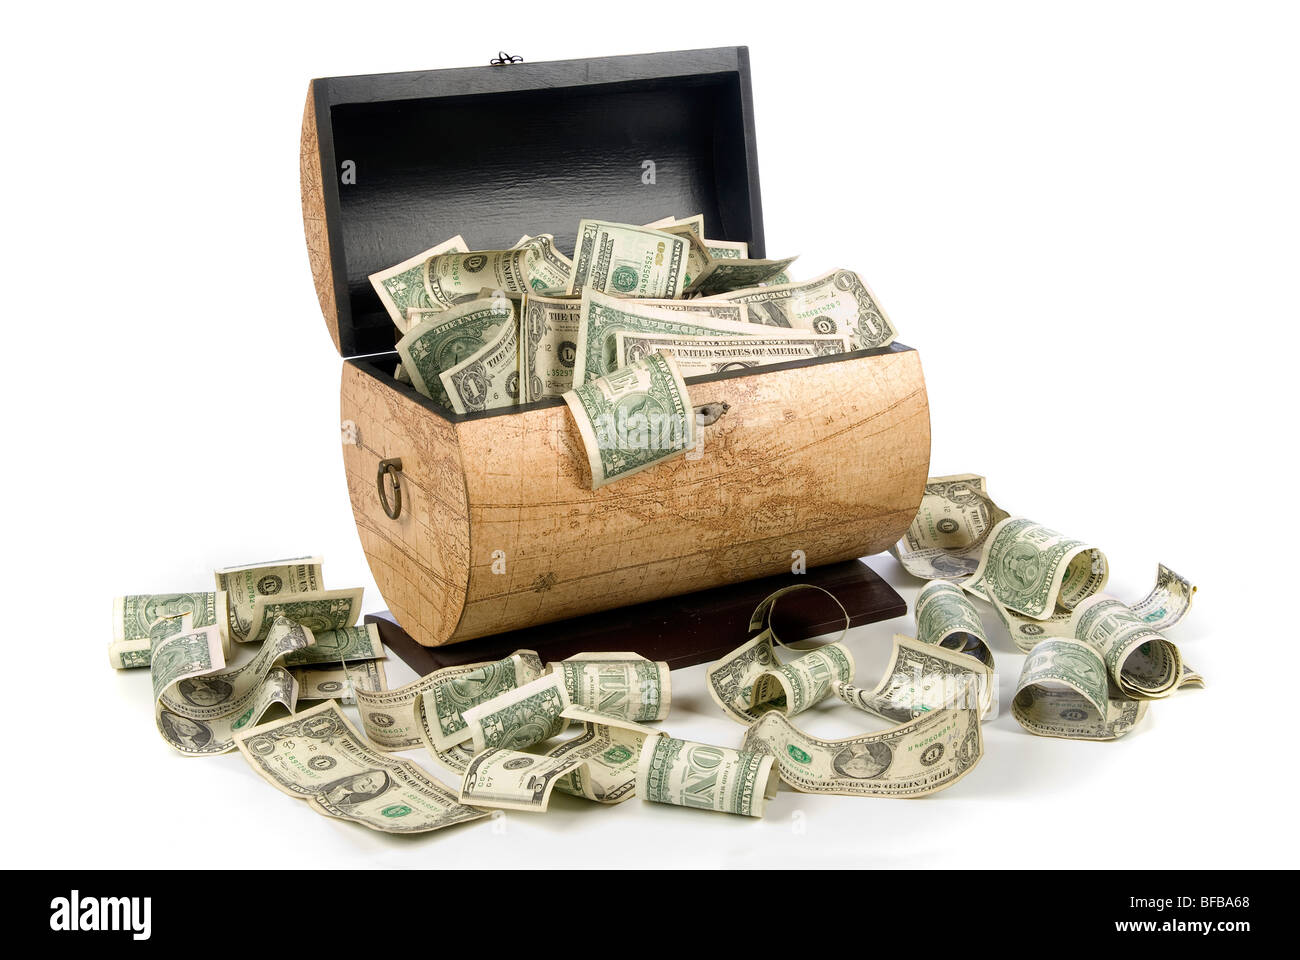 A cash box full of money is good for financial, economic, retirement and savings inferences. Stock Photo